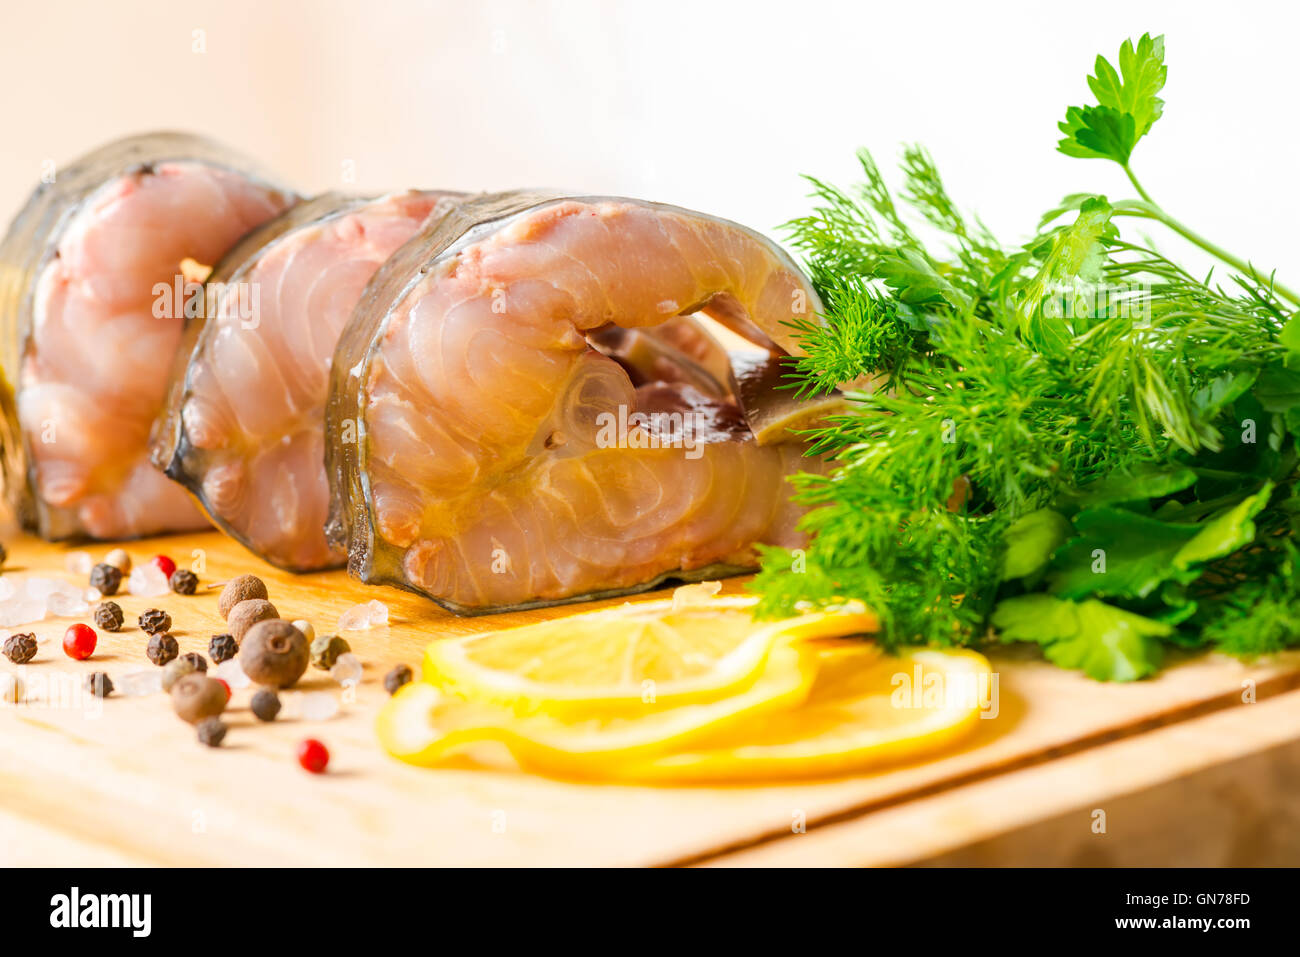 fresh raw sturgeon sliced fish with greens, lemon, different peppers and salt on wooden background, closeup Stock Photo